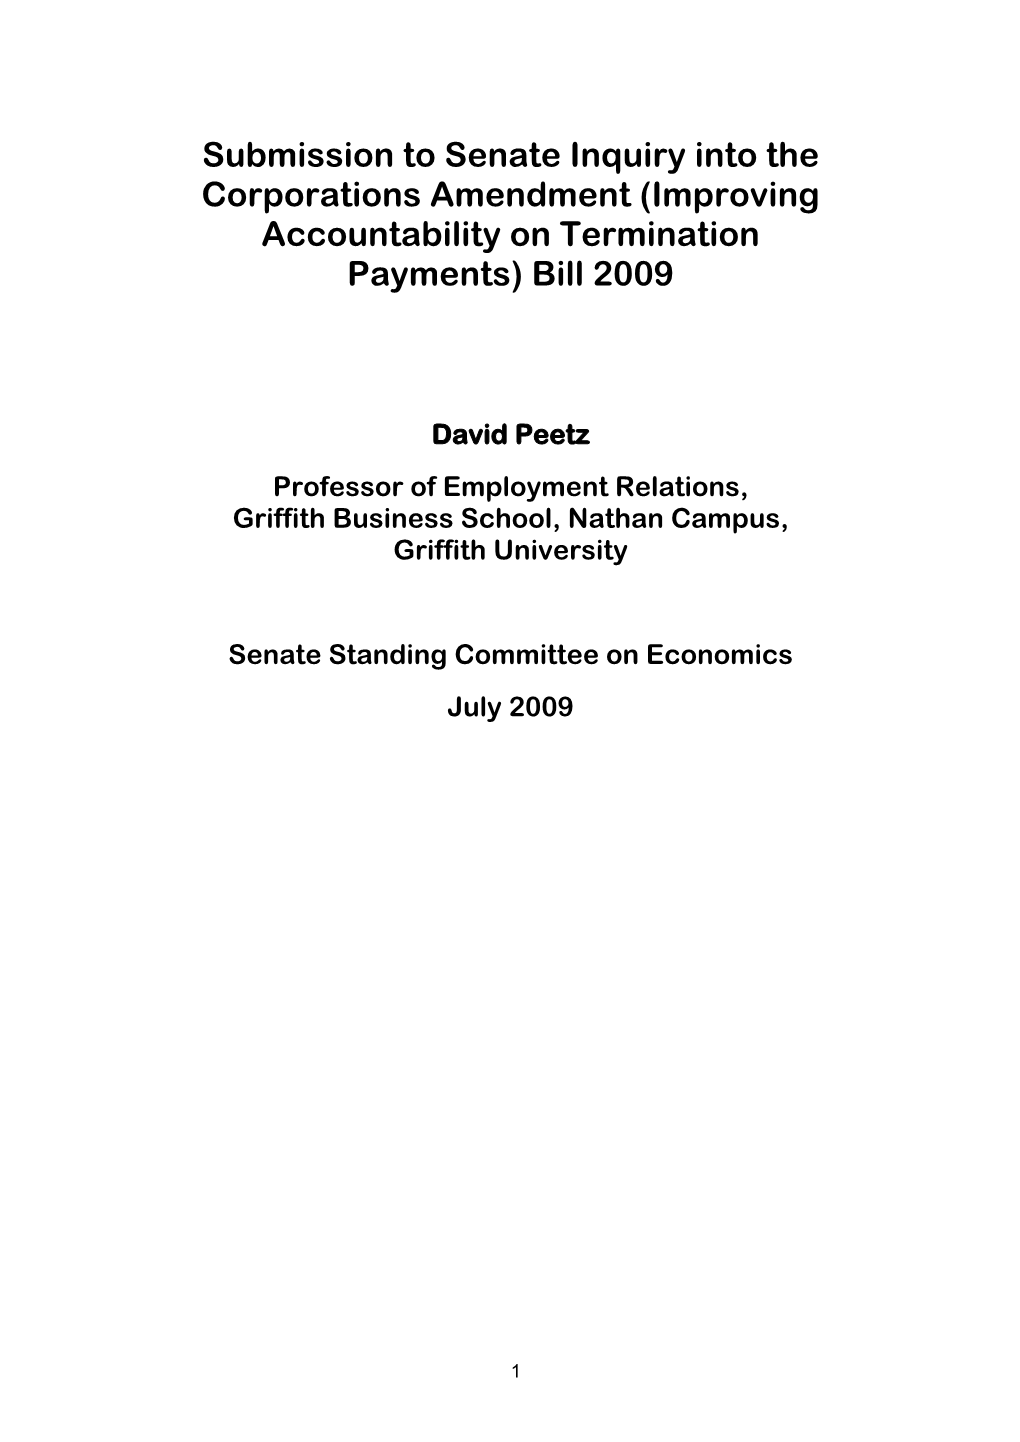 Submission to Senate Inquiry Into the Corporations Amendment (Improving Accountability on Termination Payments) Bill 2009